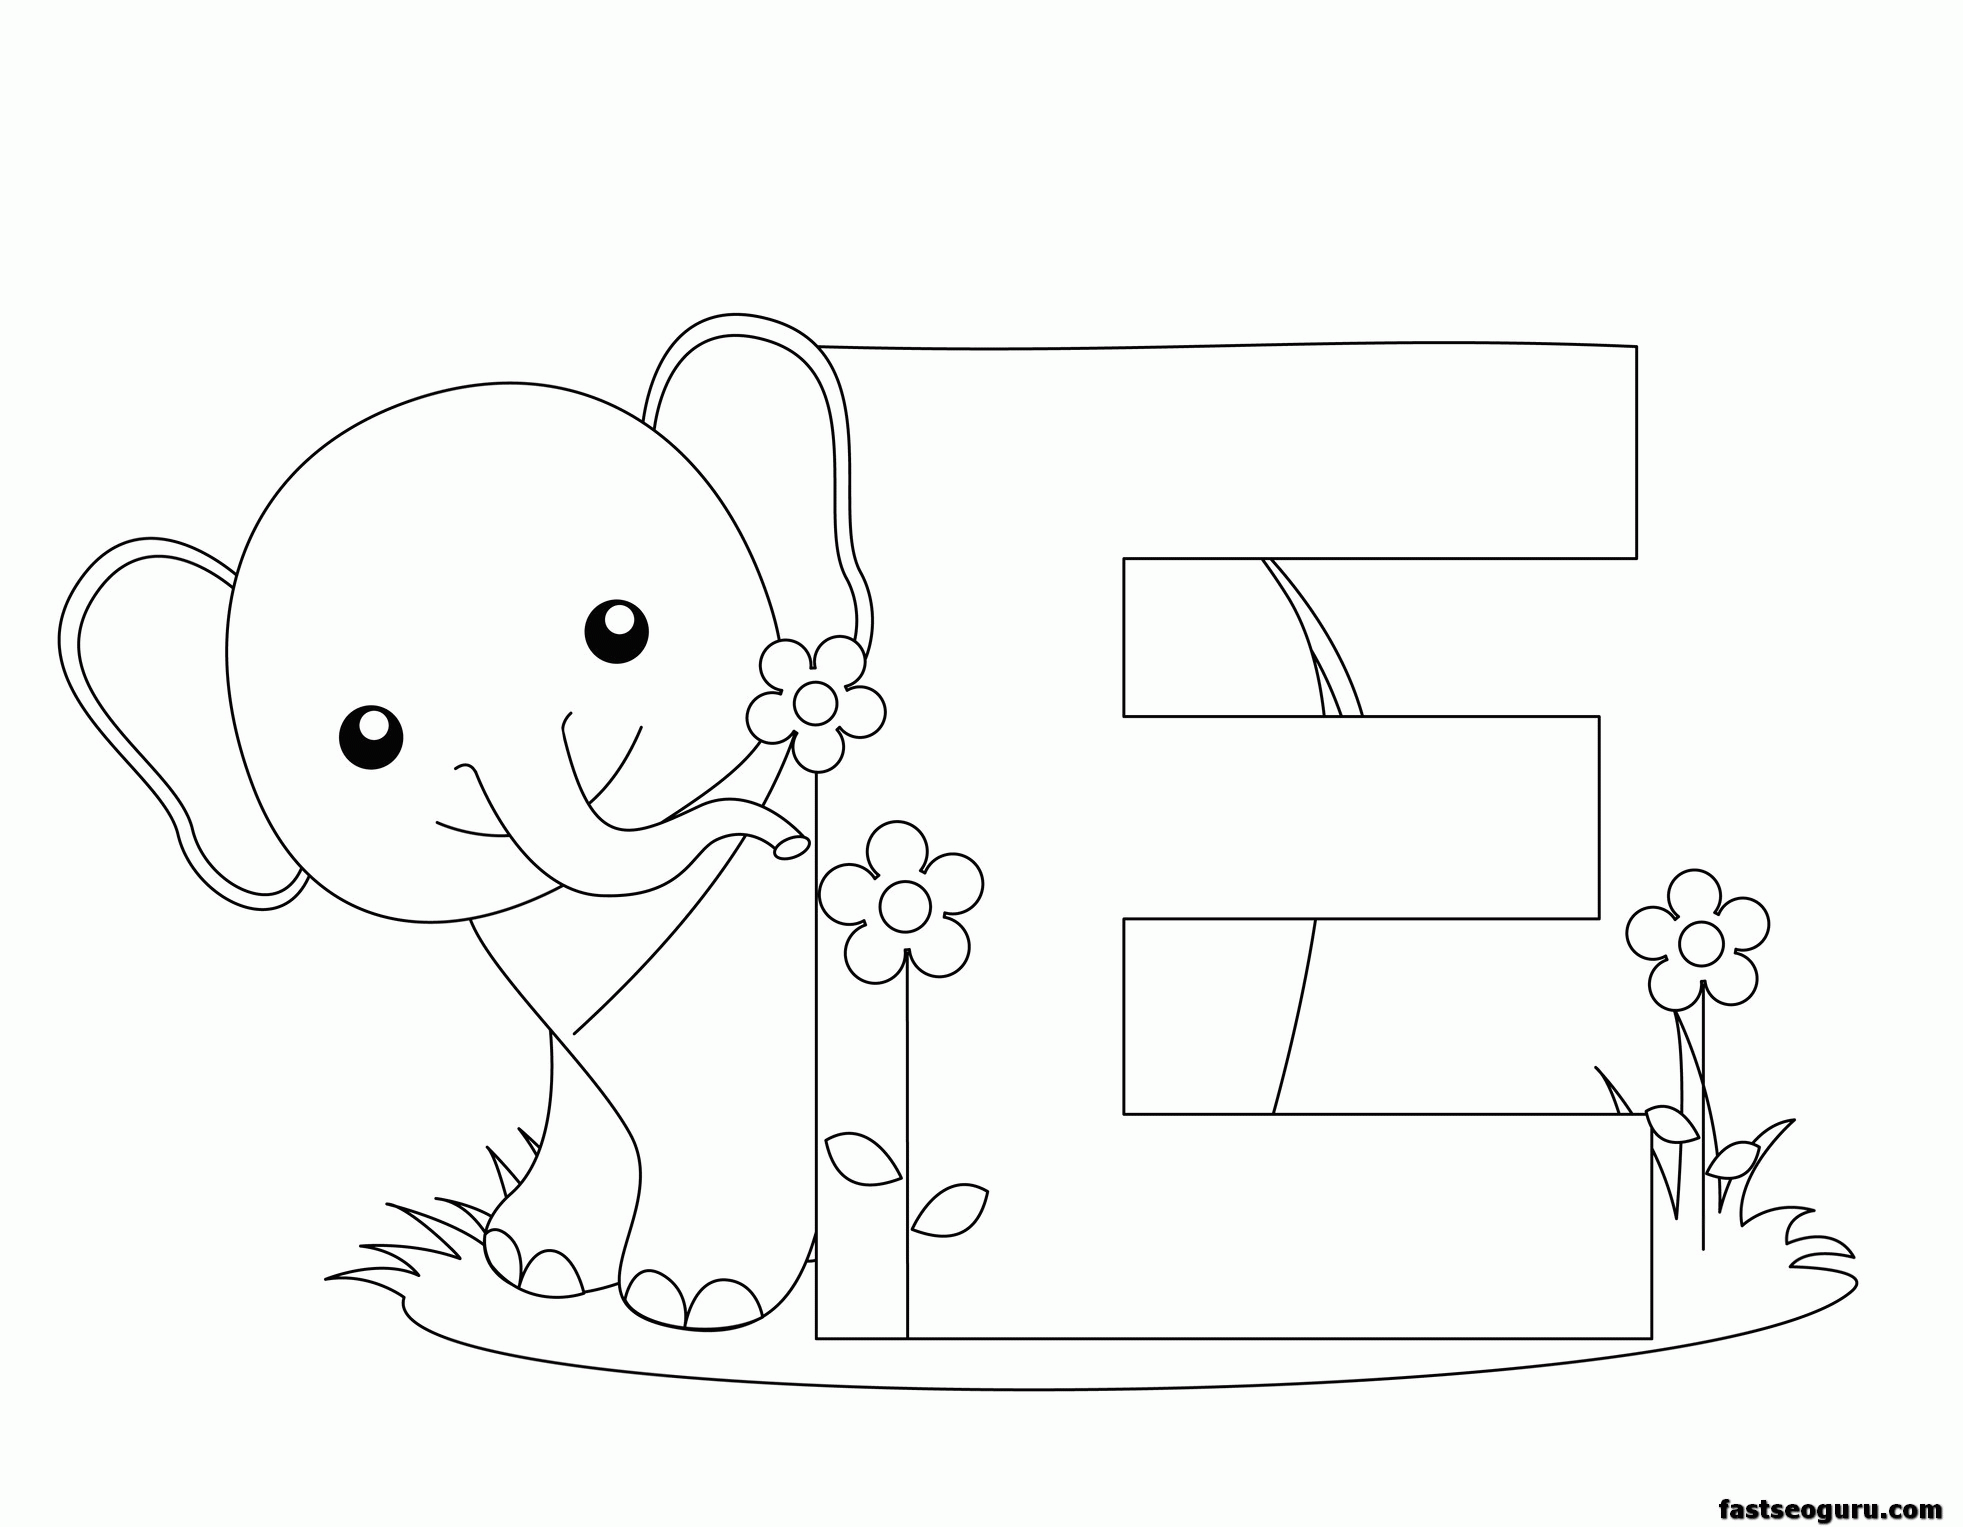 Printable Coloring Pages For S - Coloring